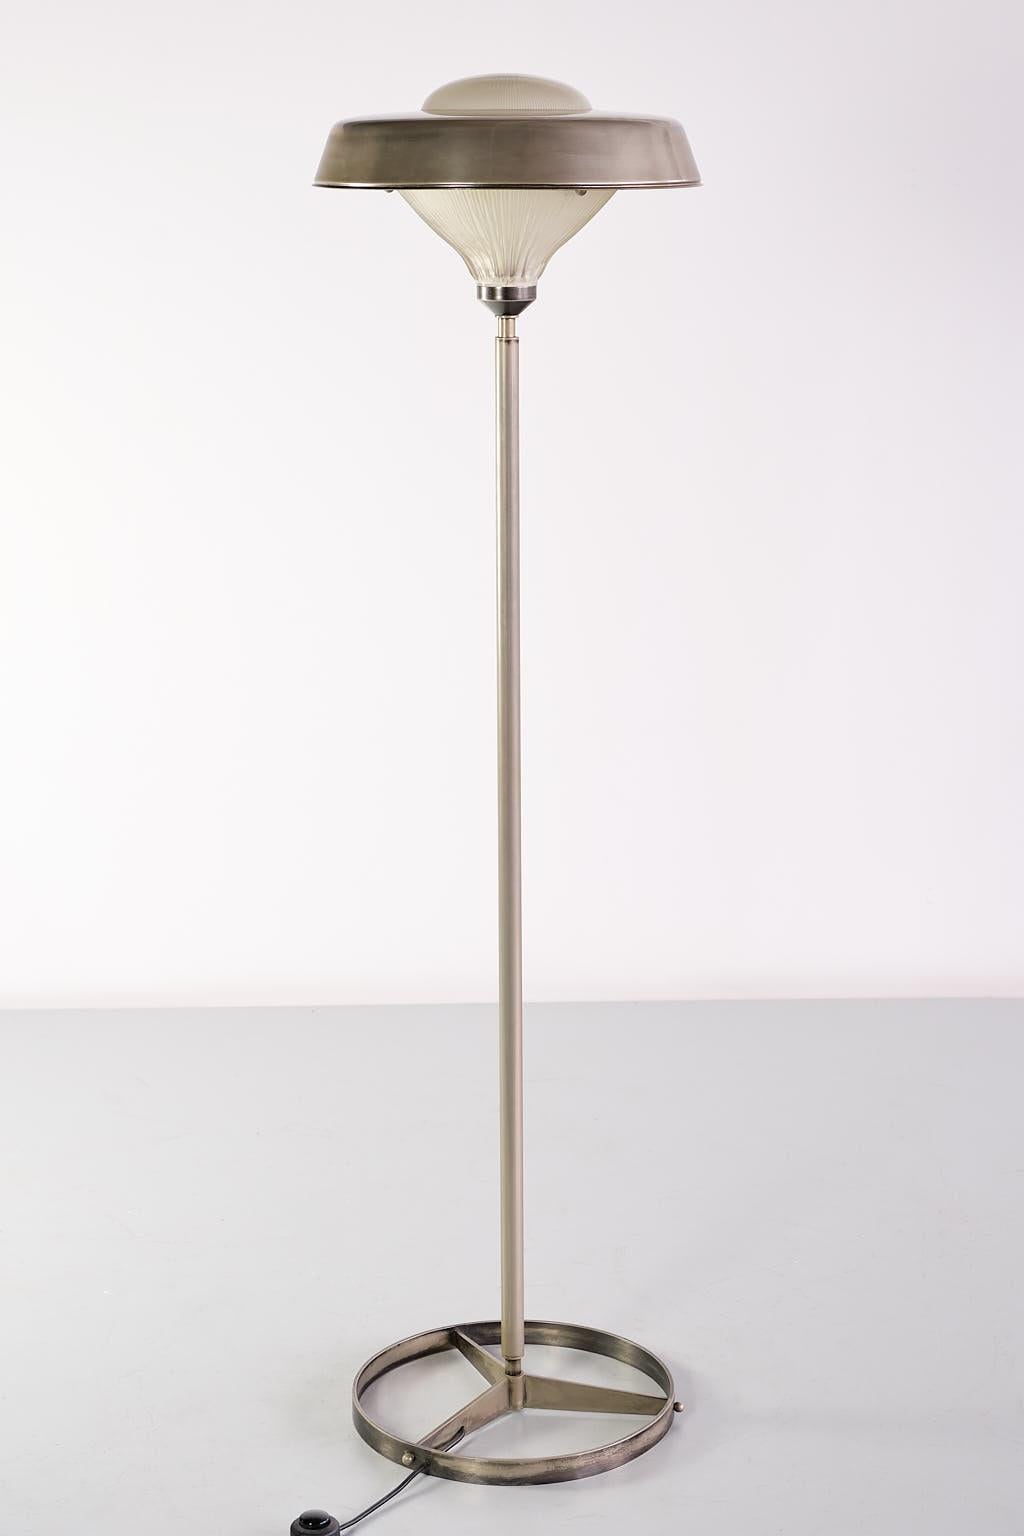 This rare floor lamp was designed by Studio BBPR and produced by Artemide, Italy in 1962. The striking design consists of a circular base in nickel plated steel with three parts leading to the central tubular steel stem. The shade is made of reeded